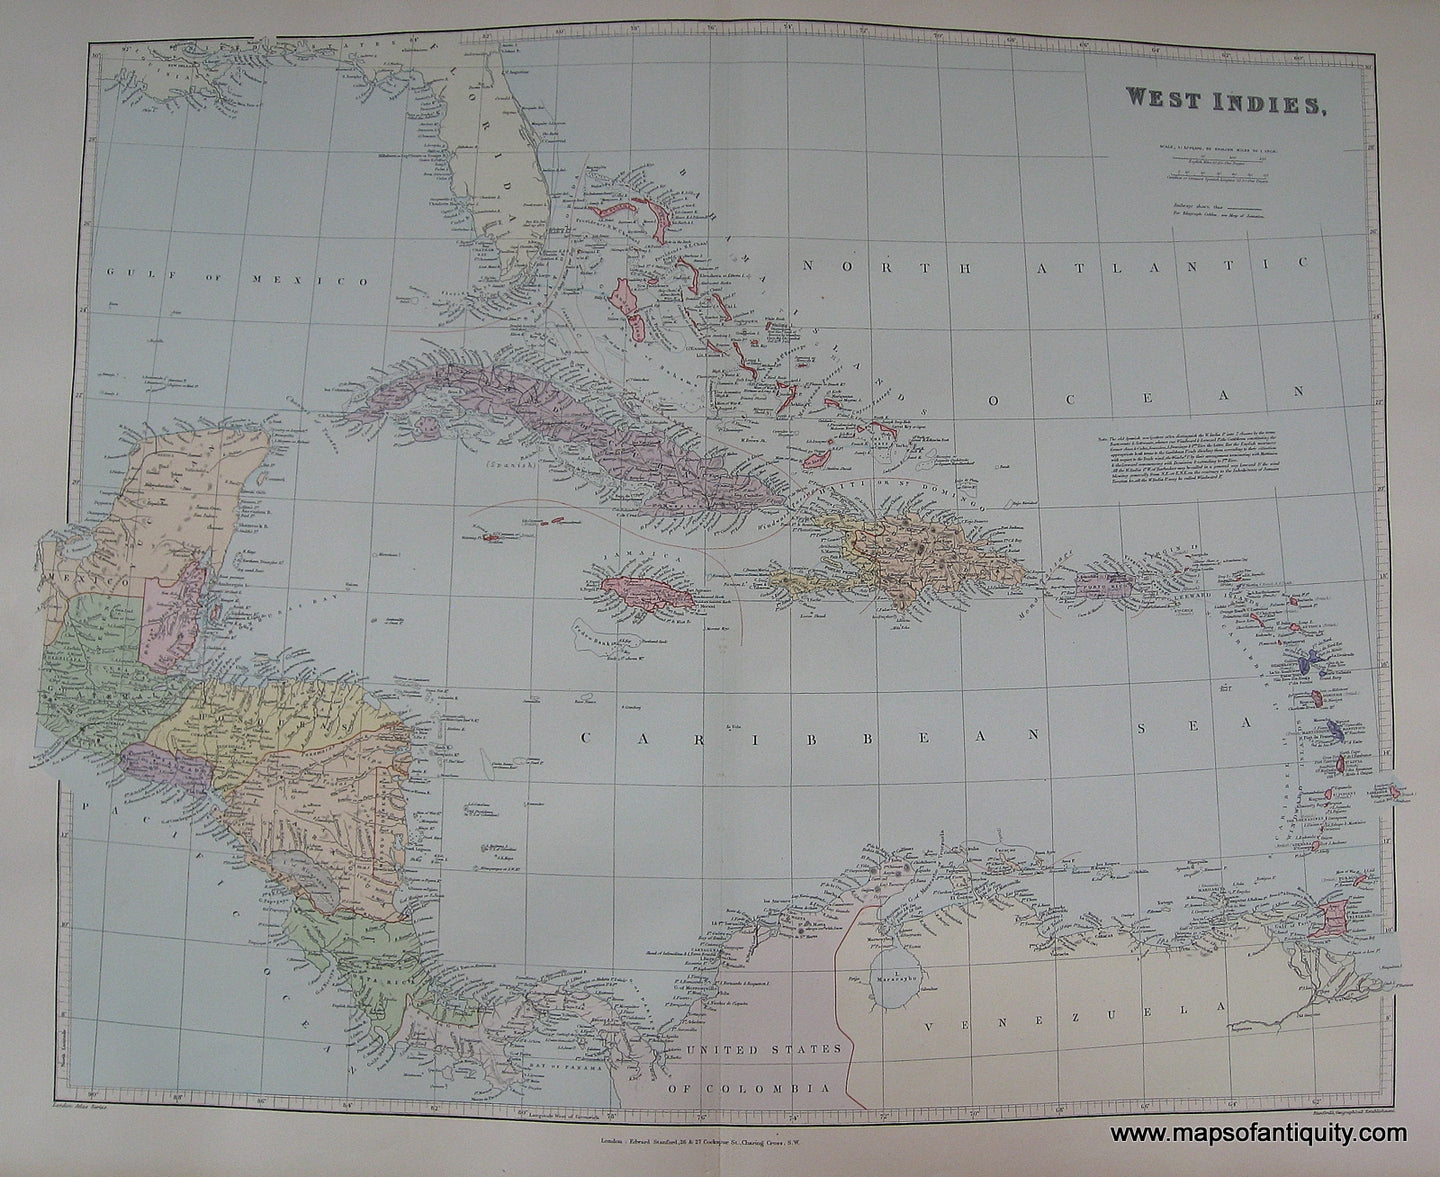 Antique-Hand-Colored-Map-West-Indies-****-Central-America-and-Caribbean-West-Indies-1894-Stanford-Maps-Of-Antiquity